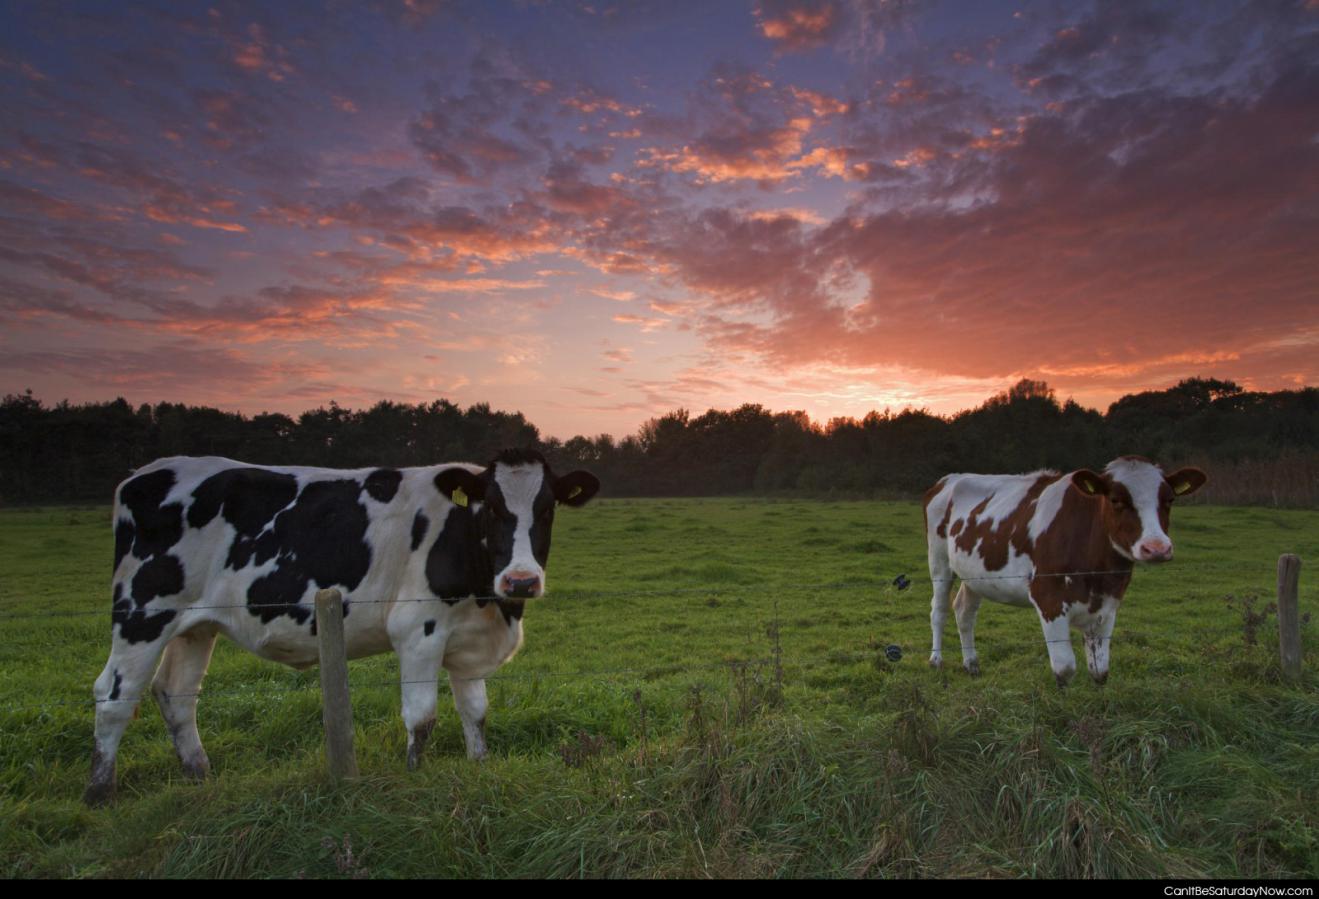 Cow sunset - two cows and a sunset